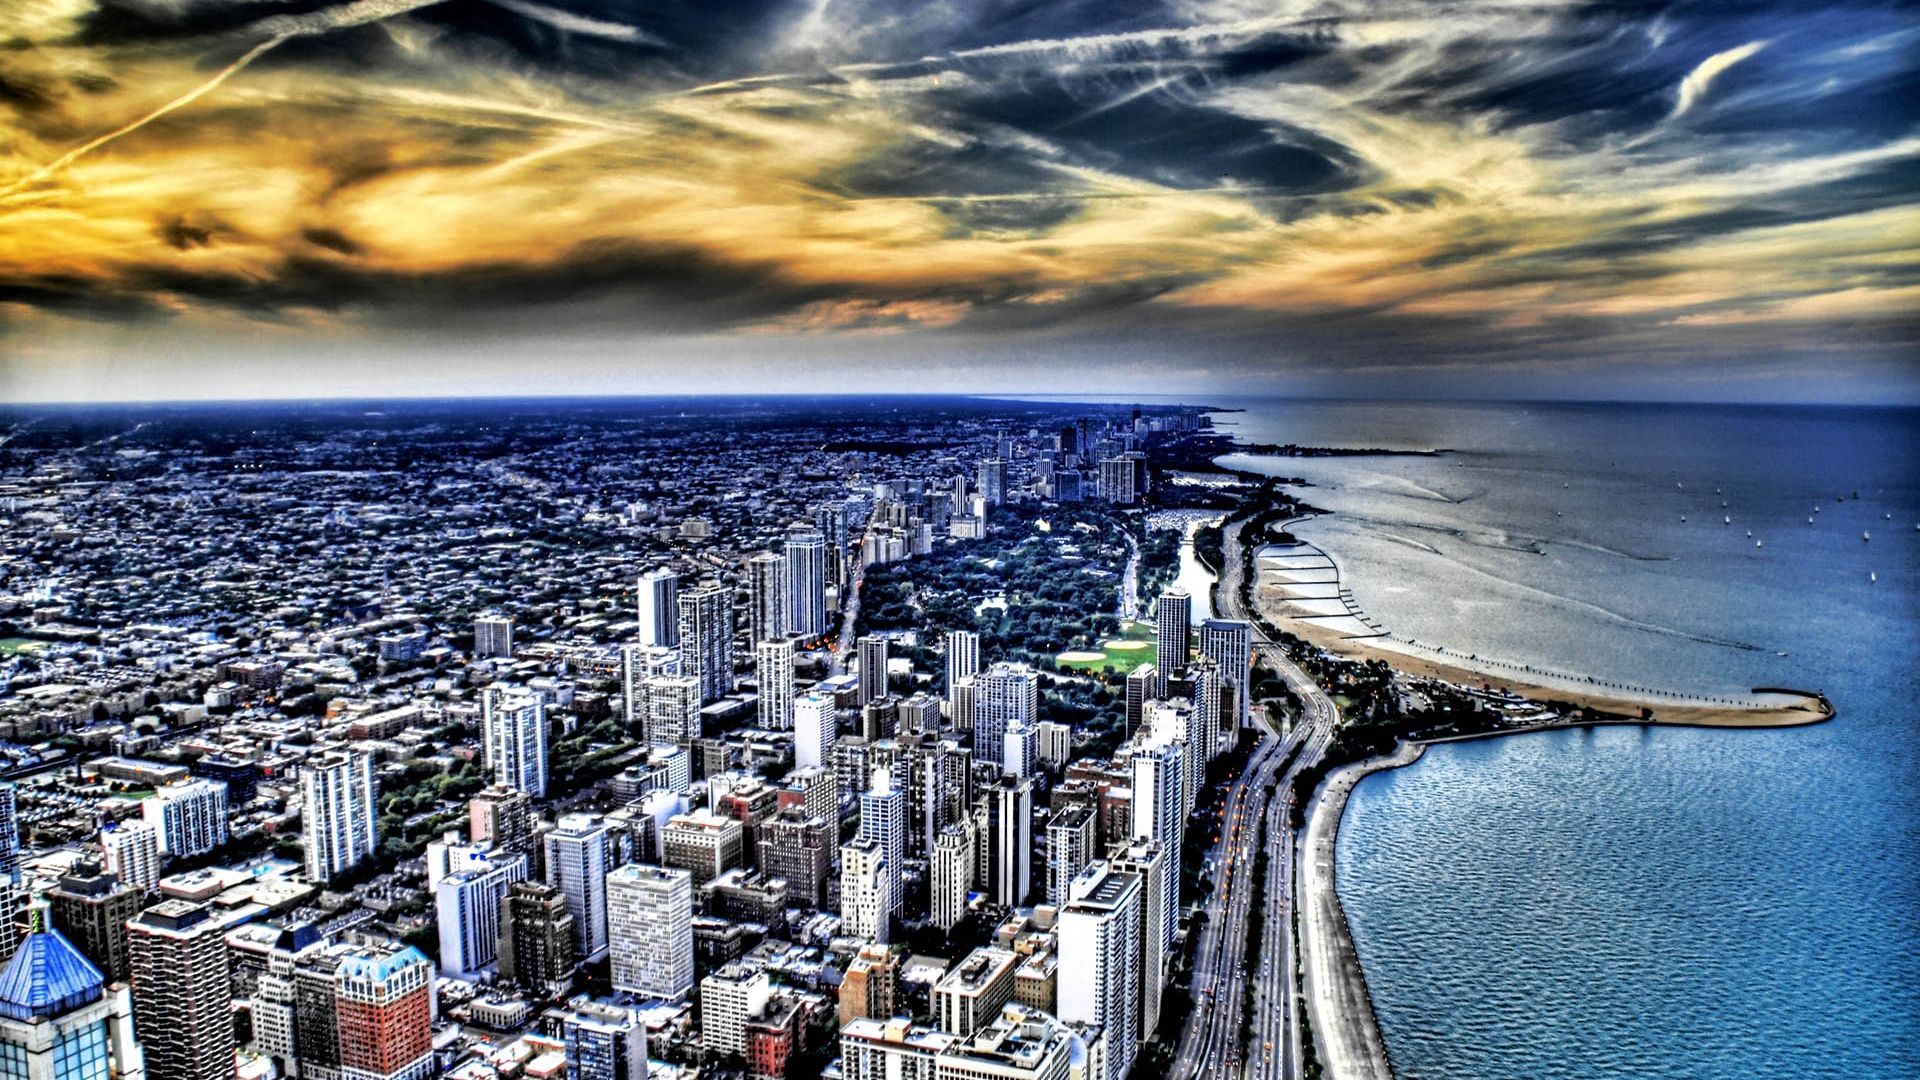 shore, chicago, cities, building, view from above, bank, ocean, skyscrapers, hdr iphone wallpaper